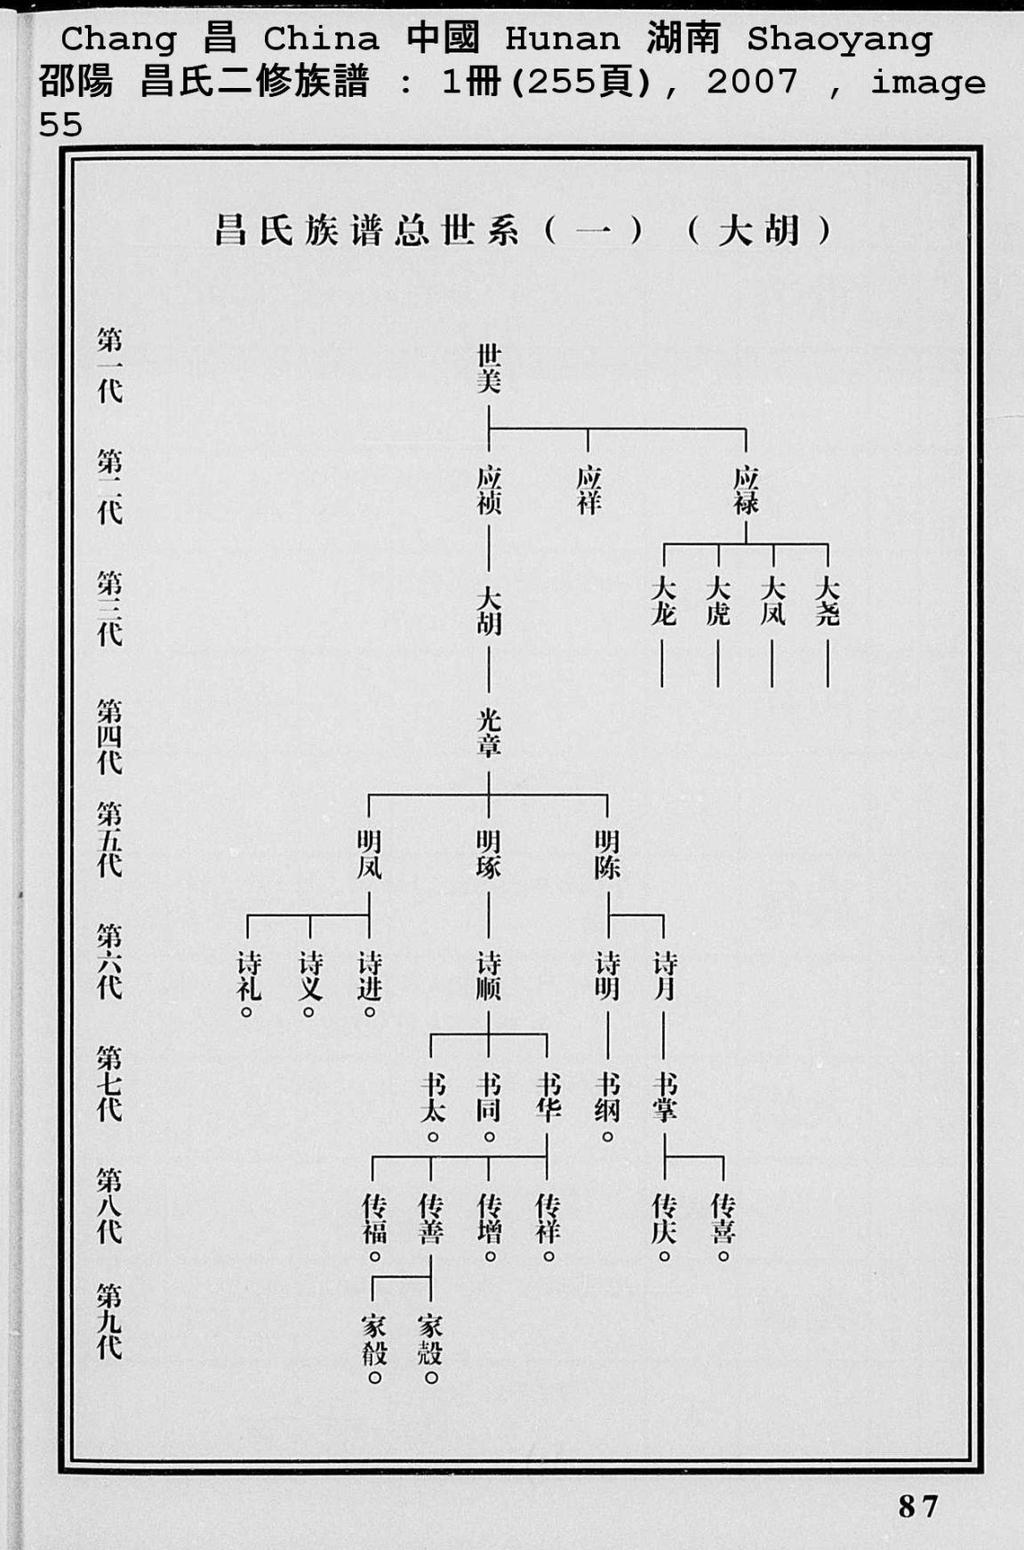 5. Here we see a similar pedigree chart (shixi 世系 ) with members of a Chang clan ( 昌氏 ) descending from a common